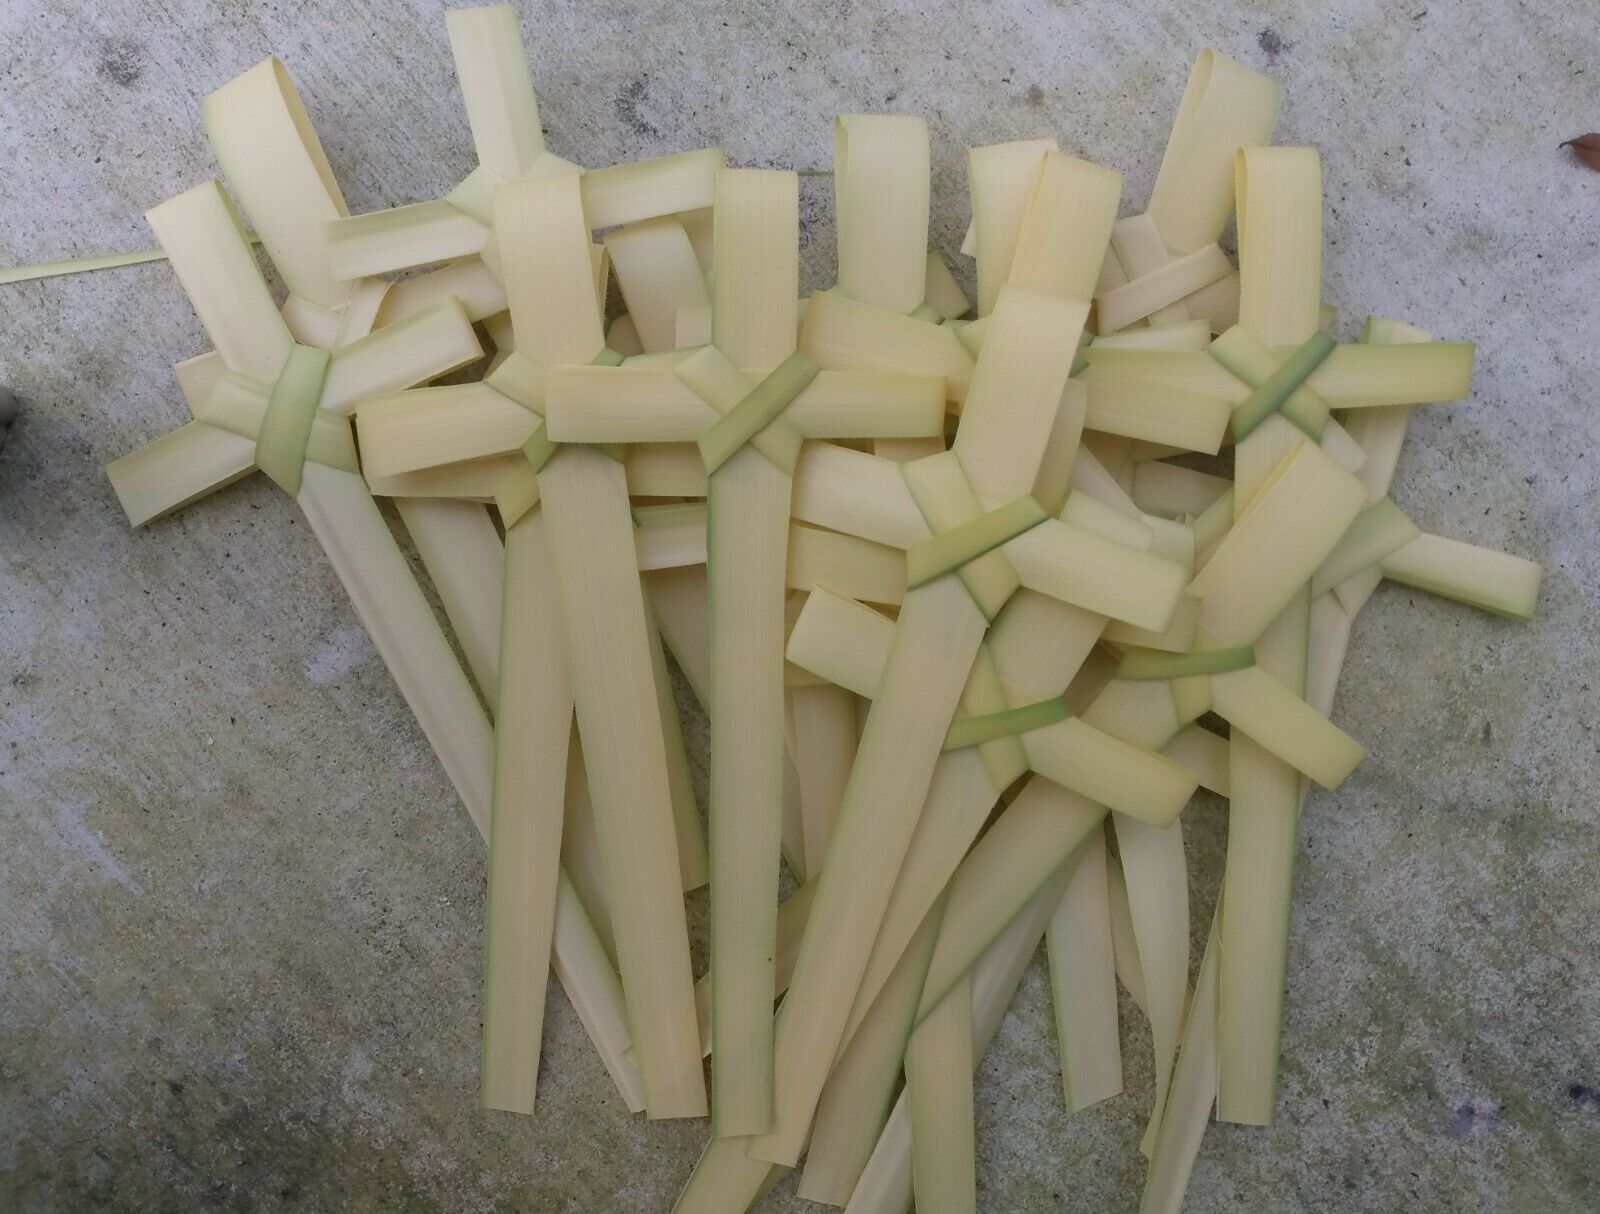 DON'T WAIT ORDER NOW  250 sm FRESH Palm Bud Crosses MADE IN FLORIDA  3day ship